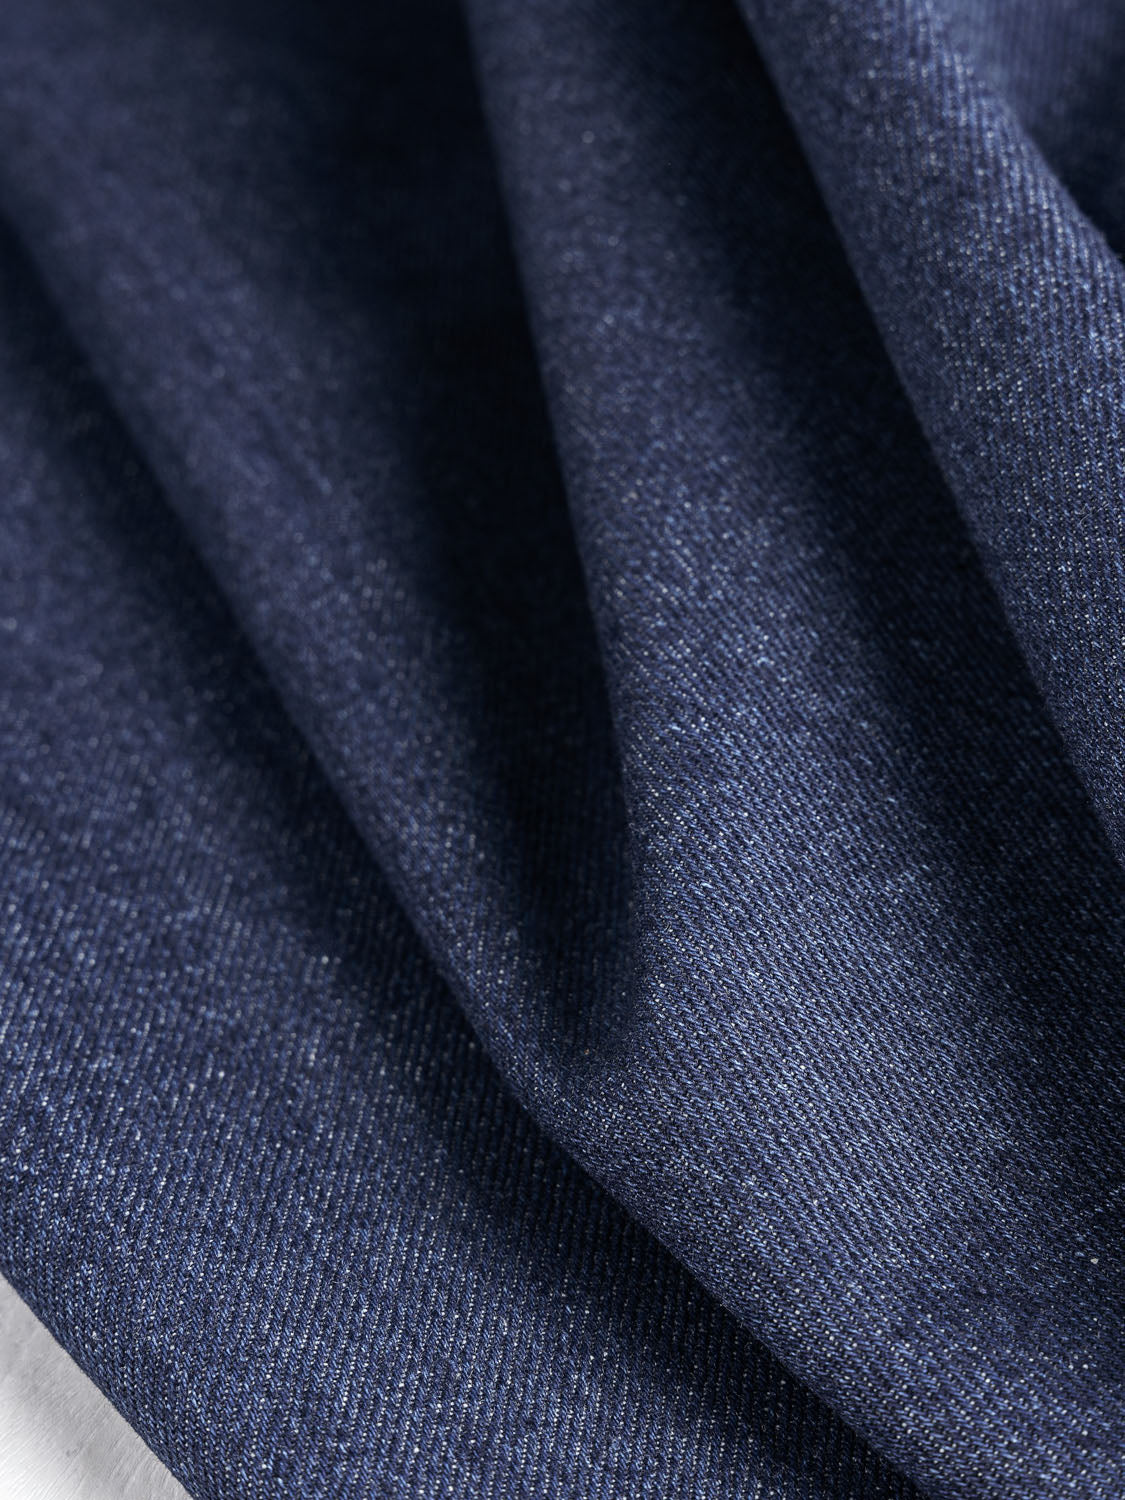 Kelso Denim Fabric by the Metre